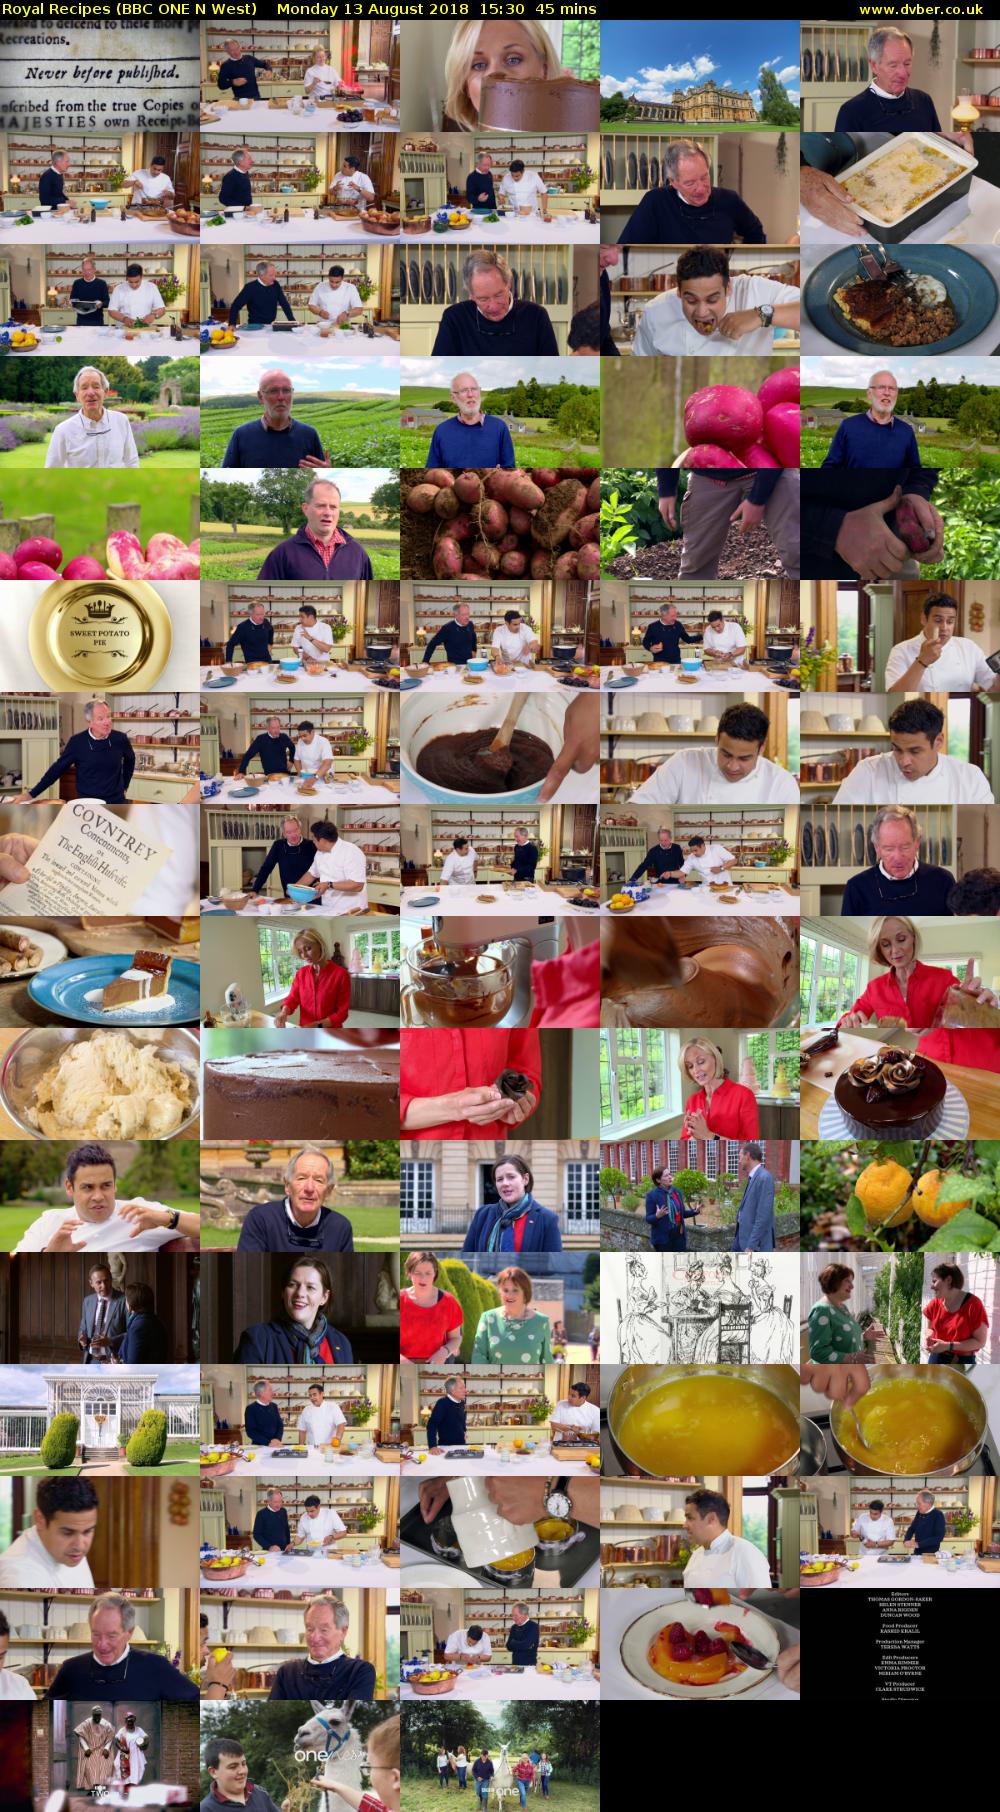 Royal Recipes (BBC ONE N West) Monday 13 August 2018 15:30 - 16:15